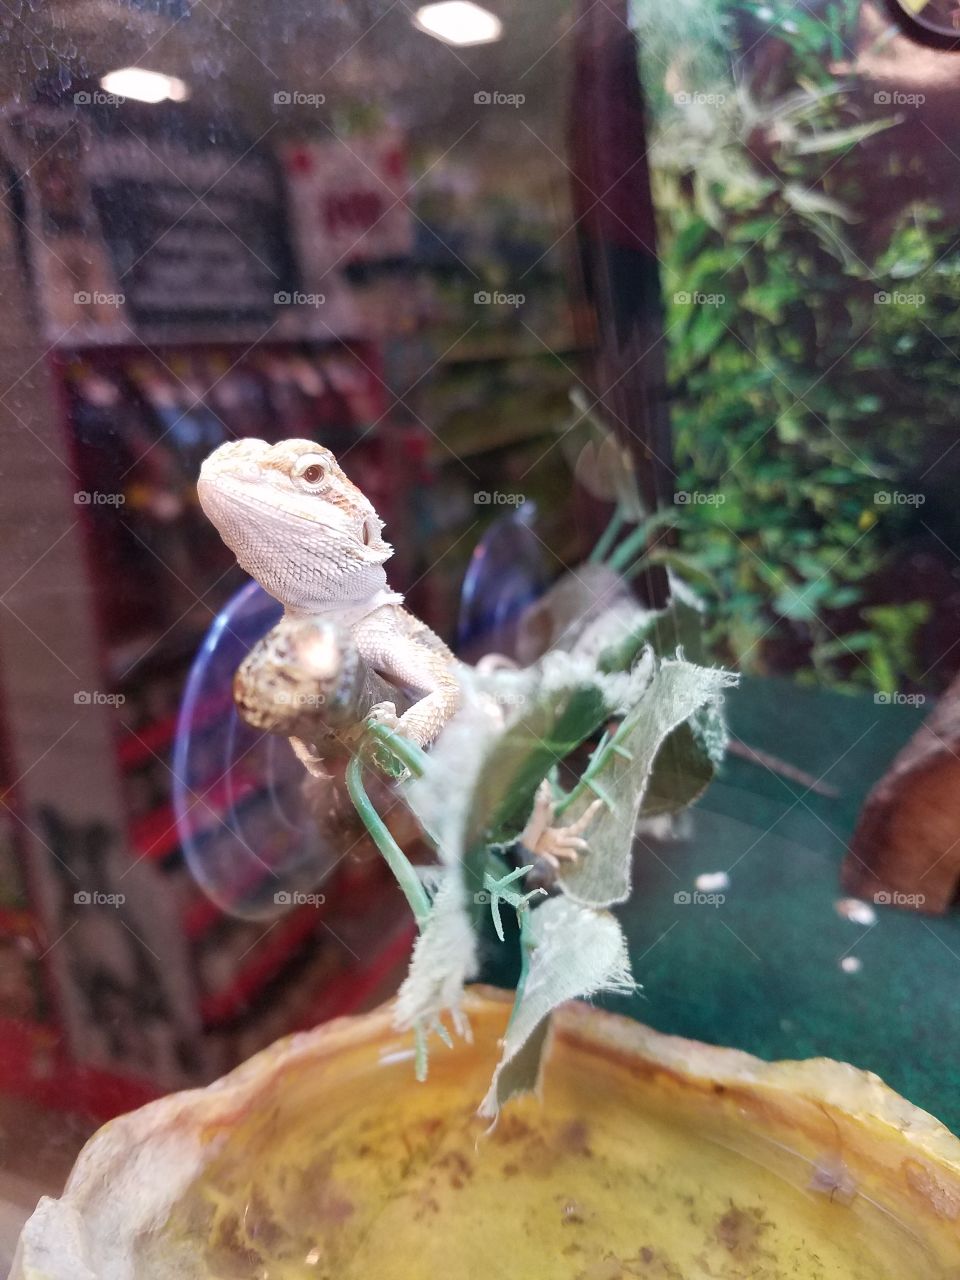 Bearded dragon at the pet store